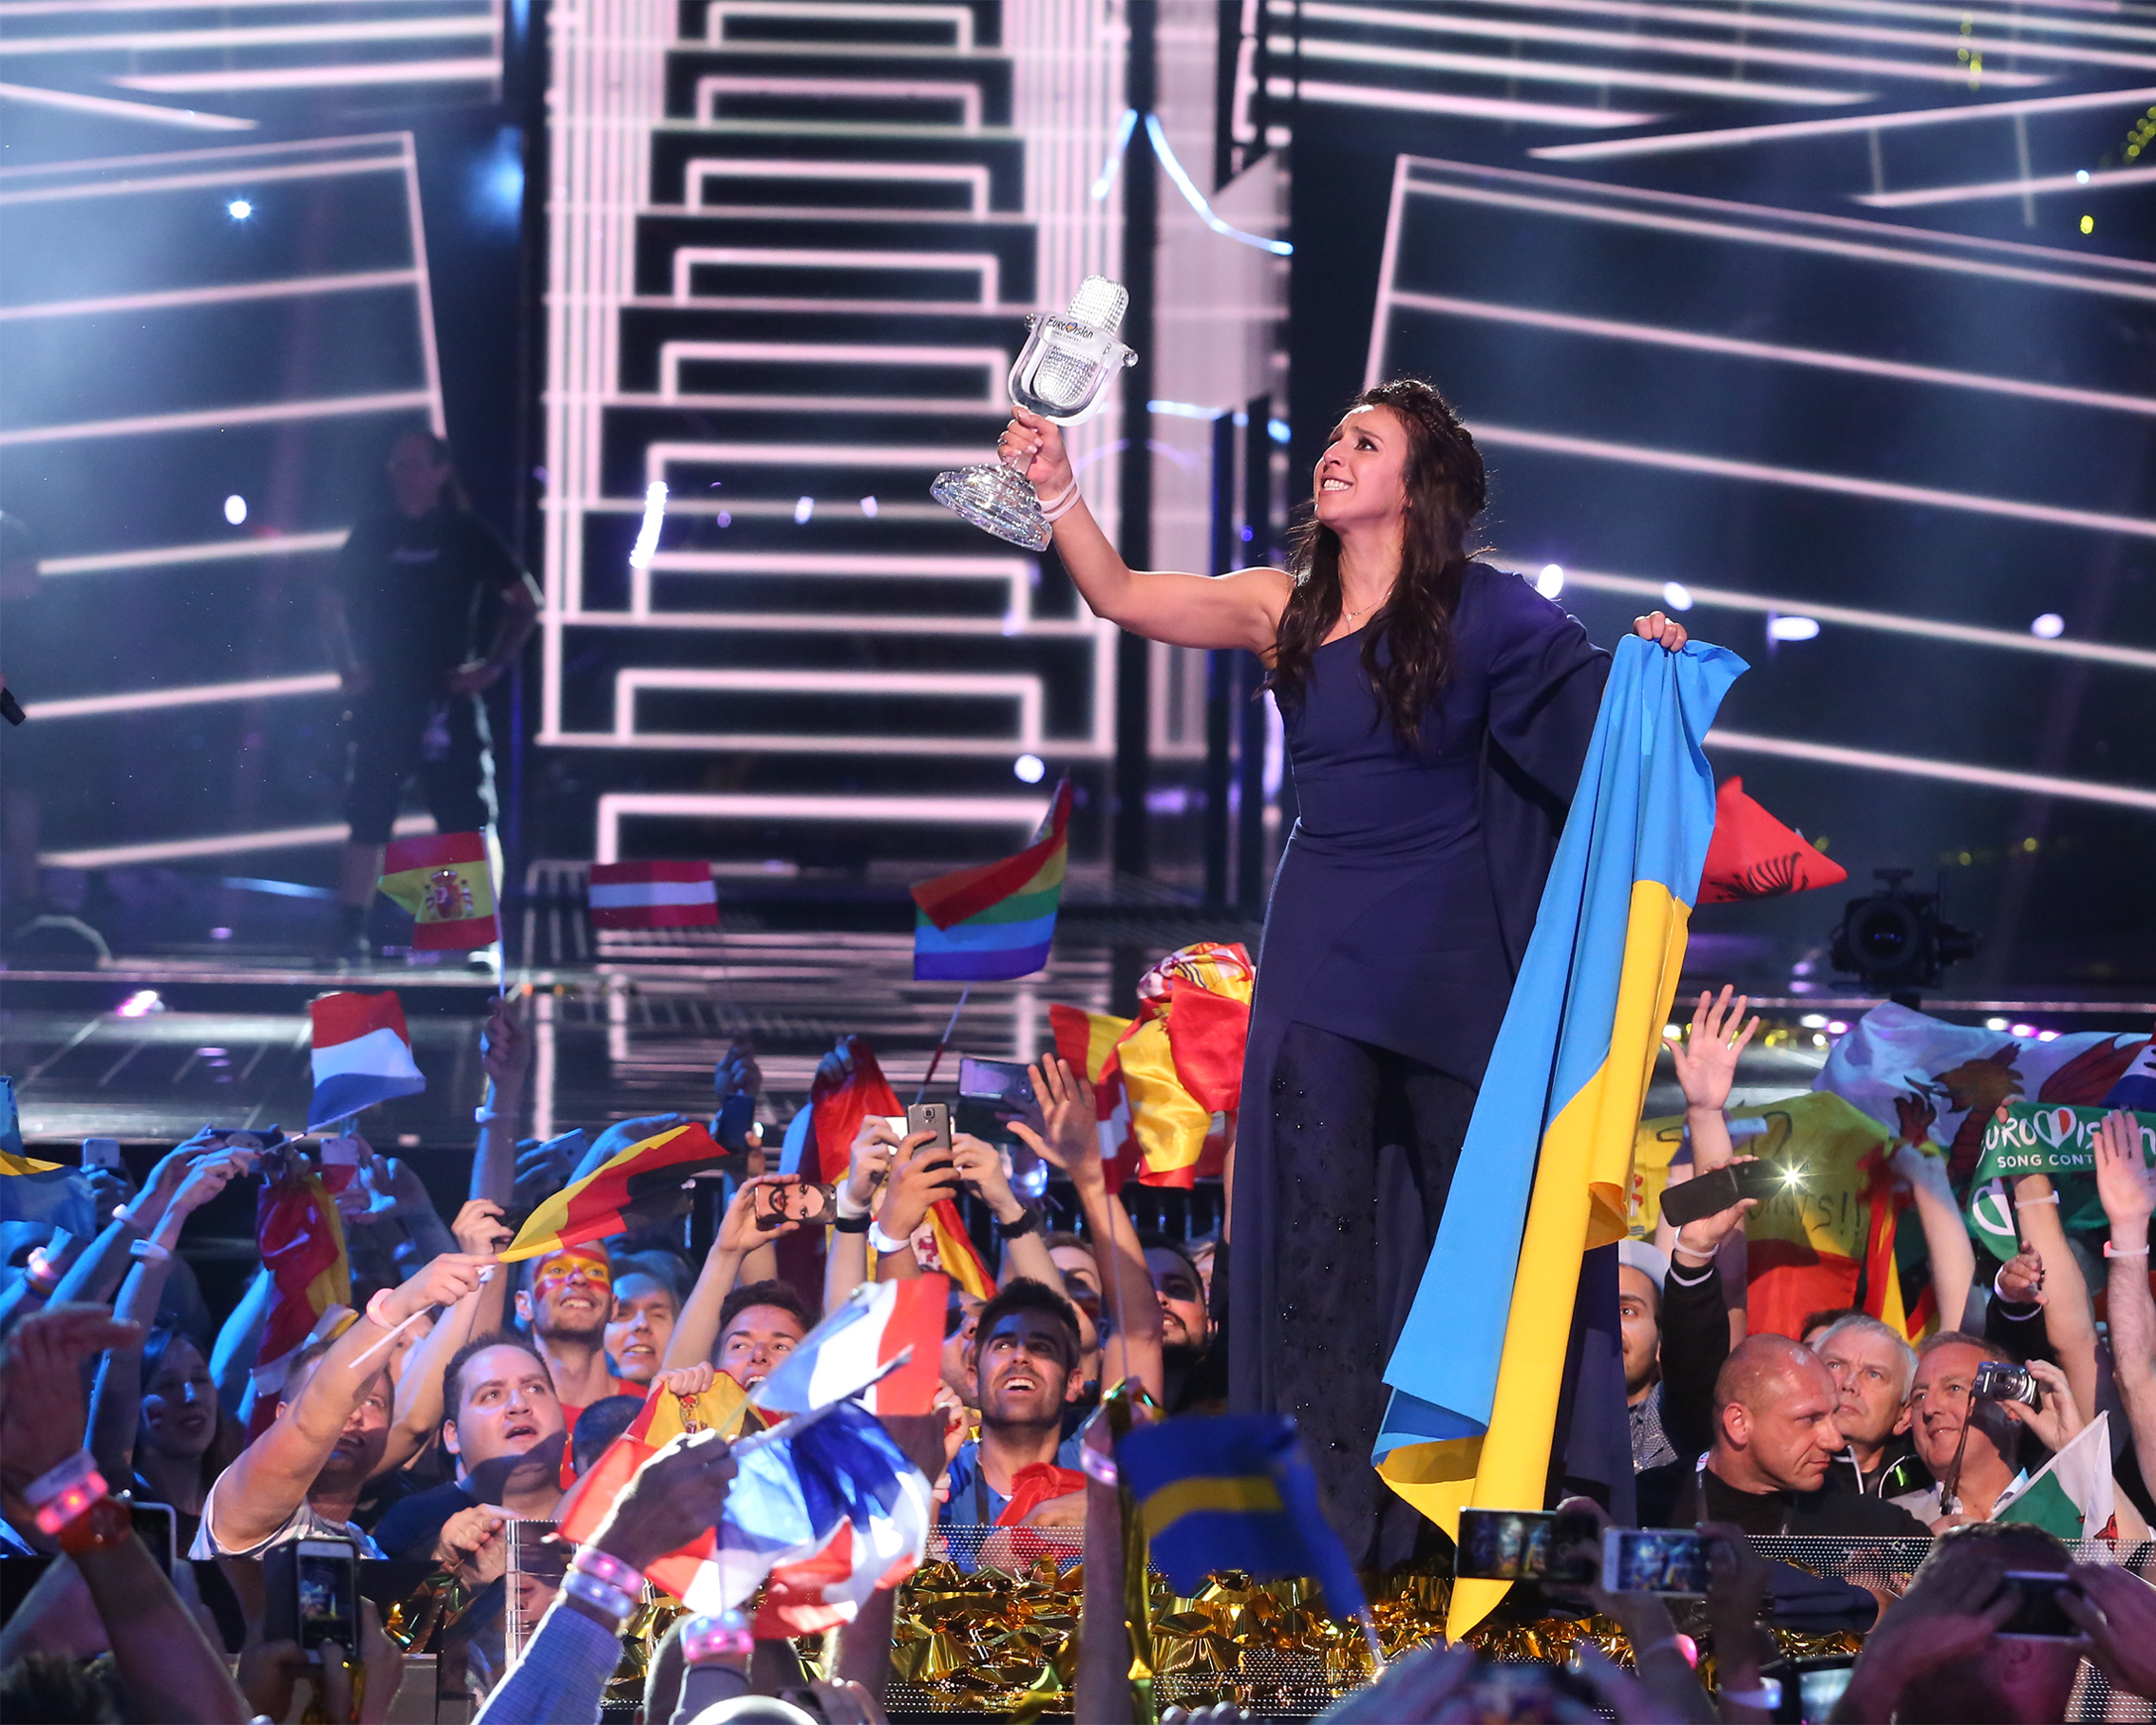 A photo showing Ukrainian singer Jamala winning the 2016 Eurovision Song Contest on May 15, 2016 in Stockholm, Sweden.